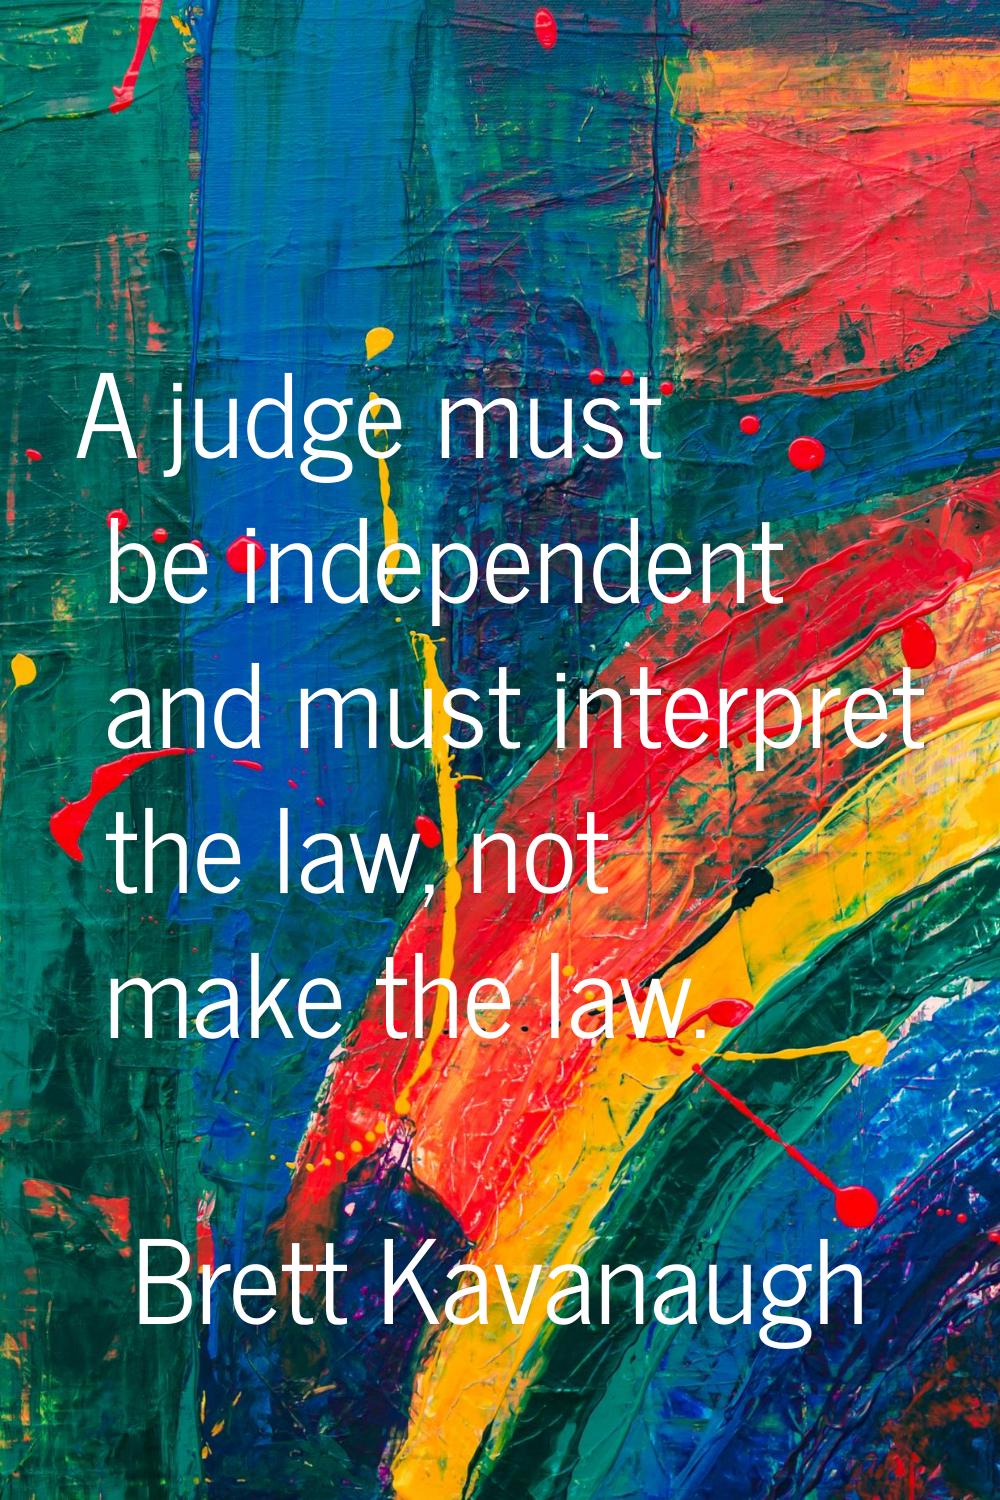 A judge must be independent and must interpret the law, not make the law.